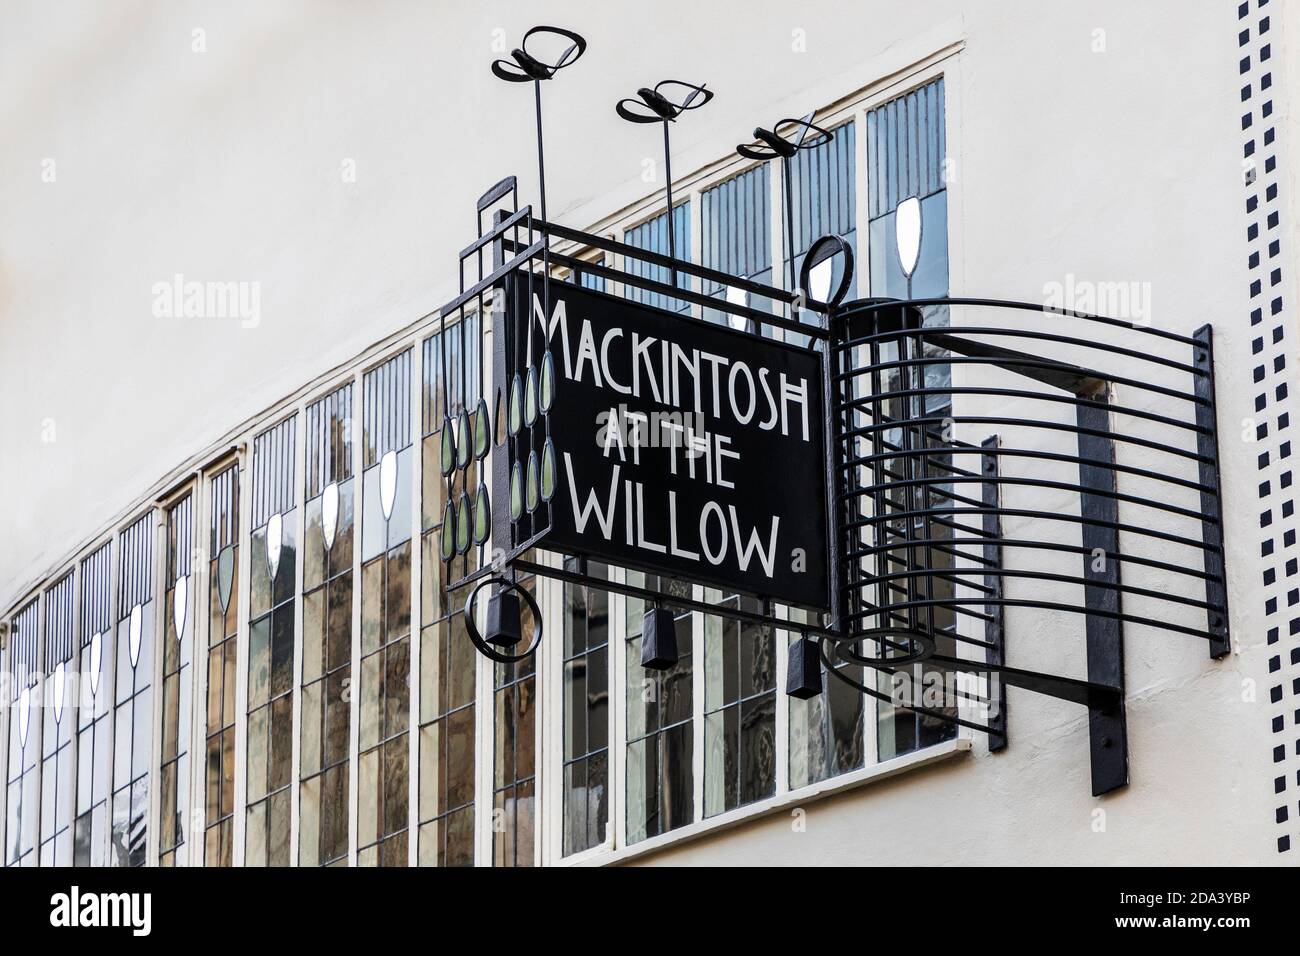 Sign in the art deco style of Charles Rennie Mackintosh, outside the Mackintosh at the Willow tearoom, Sauchiehall Street, Glasgow, UK Stock Photo